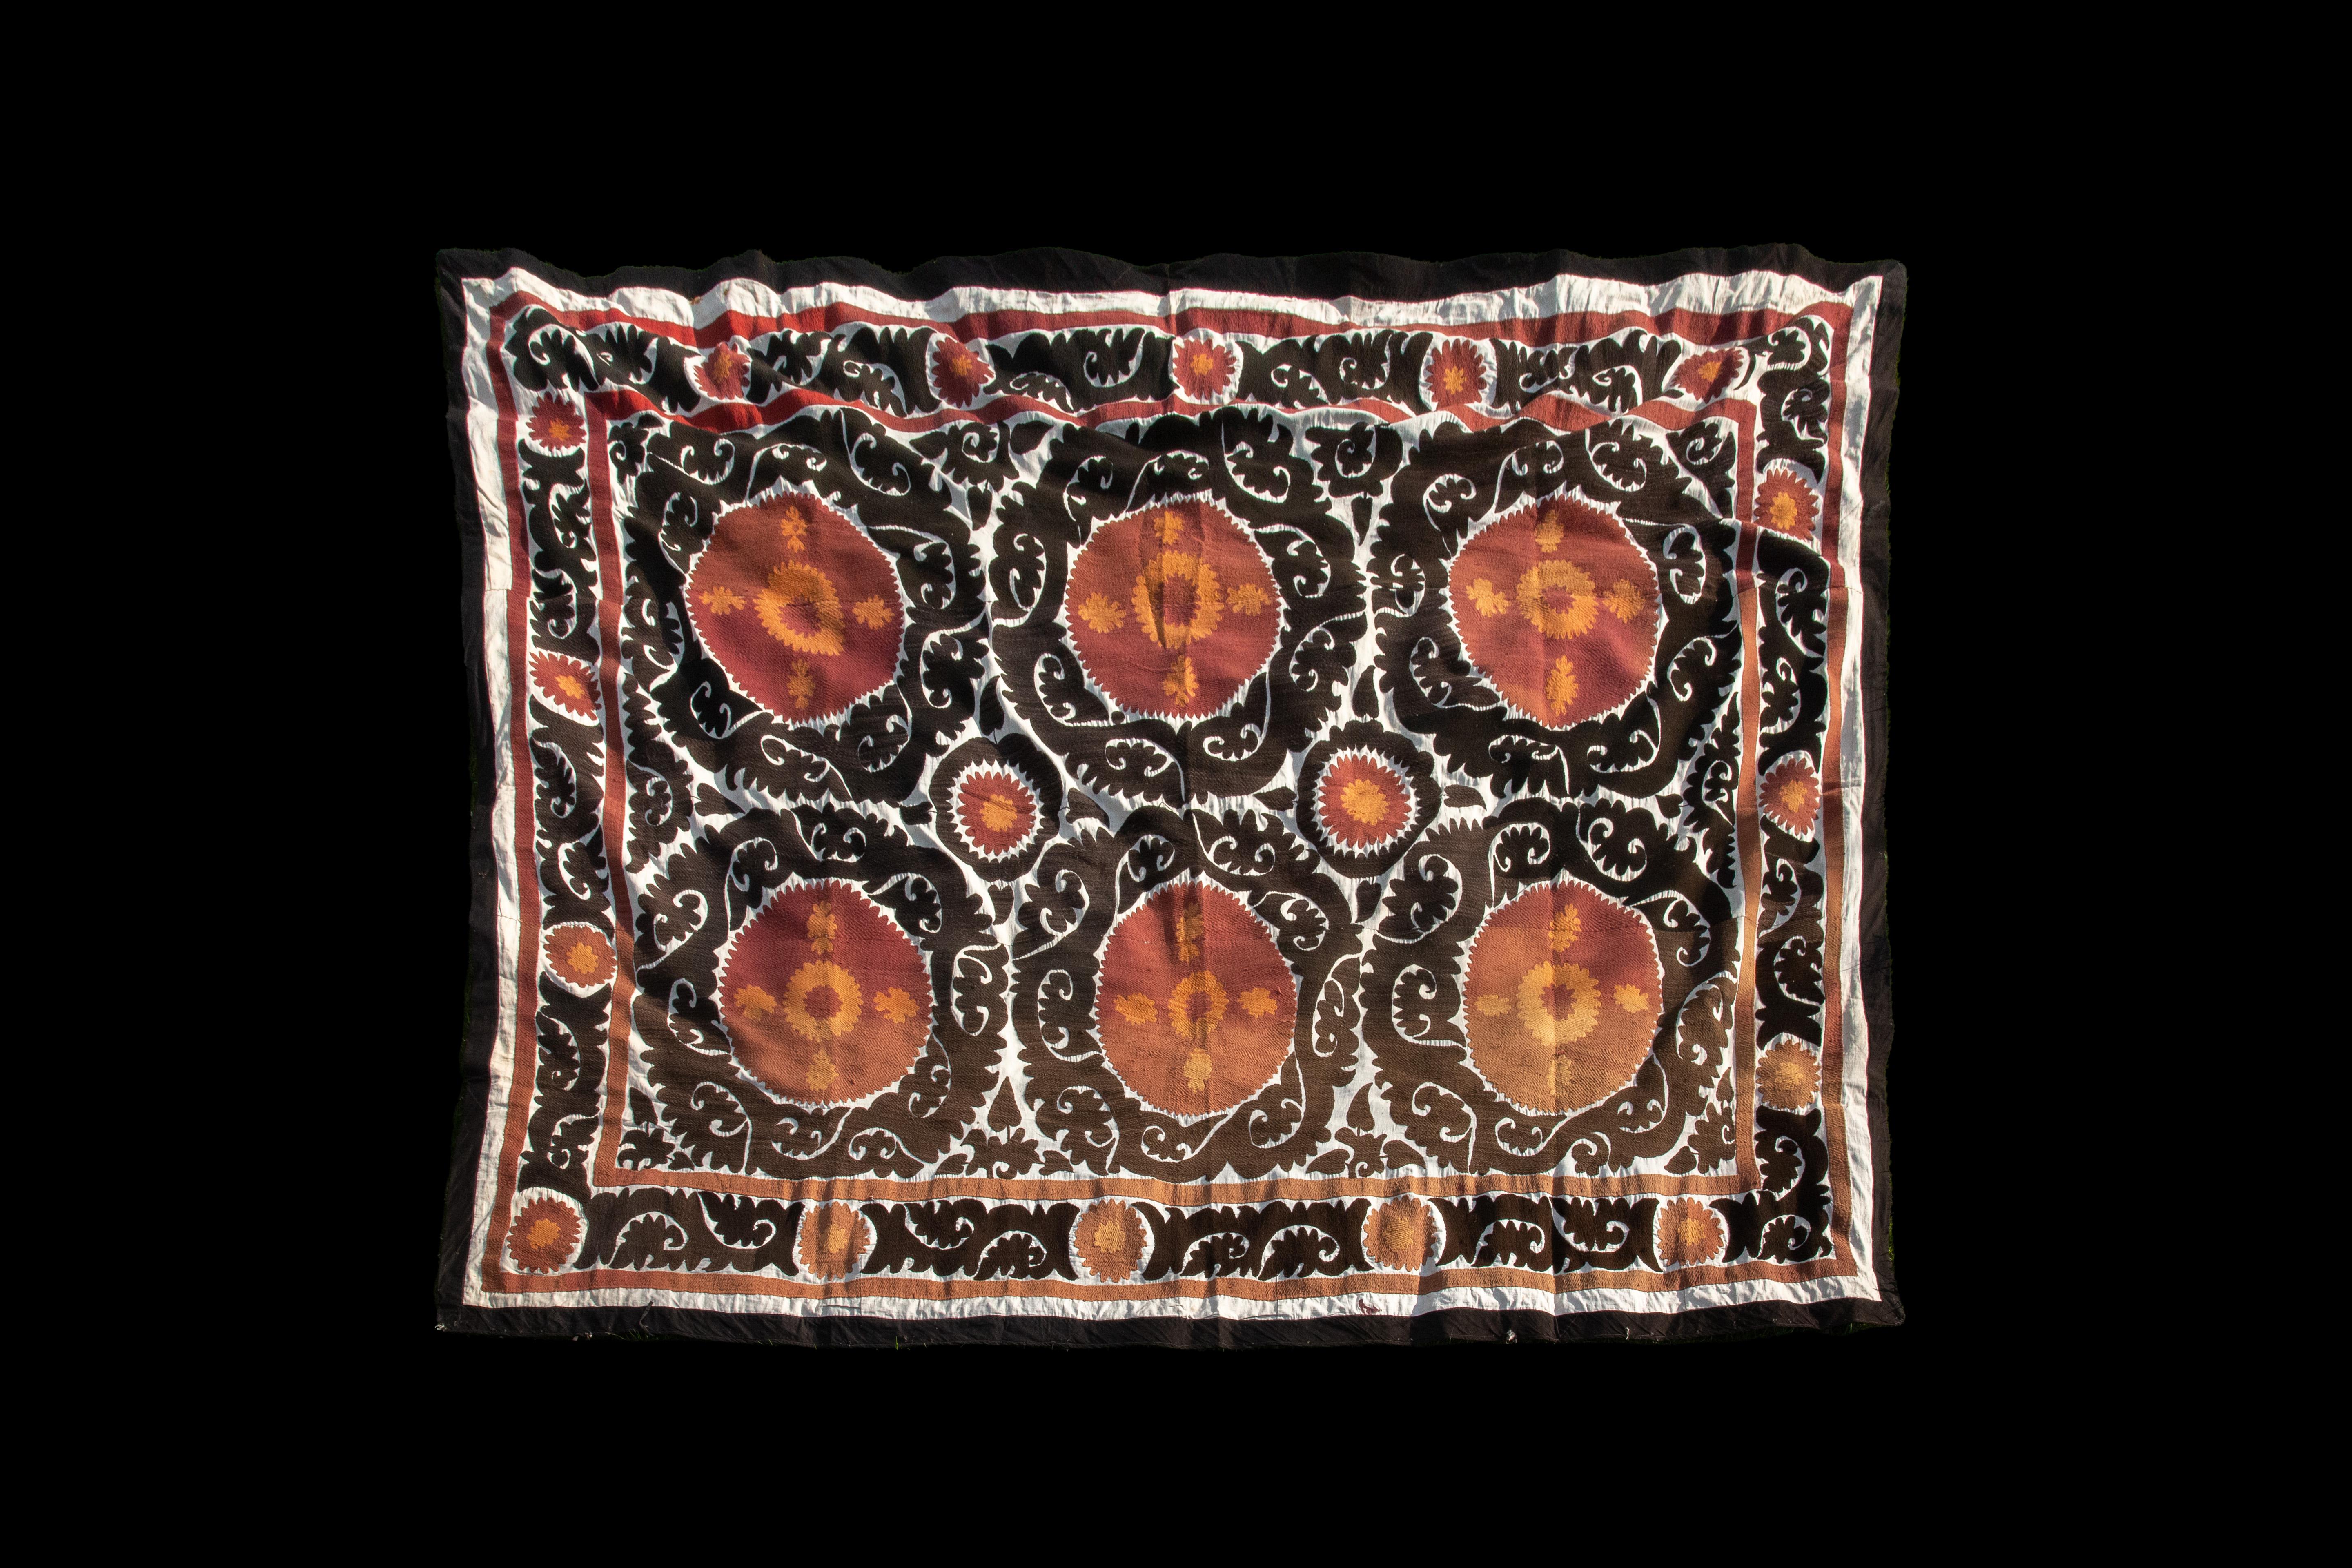 Handmade Vintage Cotton Suzani, Orange, and Charcoal

Richly hand-embroidered vintage Uzbek suzani in iconic black and copper oranges.
Sun burst flowers are ringed with black scrolls on natural cotton.
Cotton embroidery in tight stitches give a